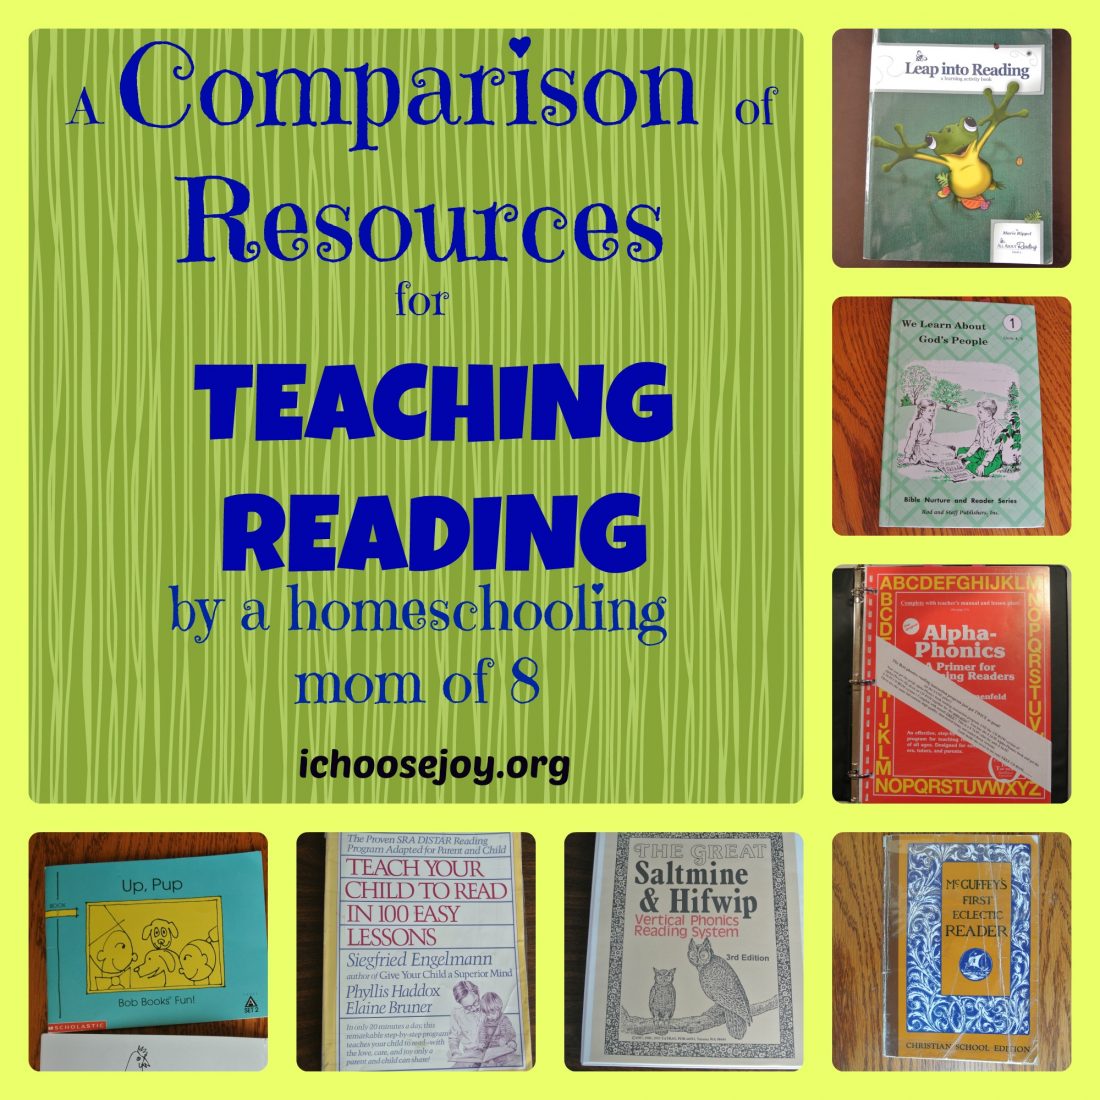 A Comparison of Resources for Teaching Reading by a homeschool mom who taught her 8 kids to read.